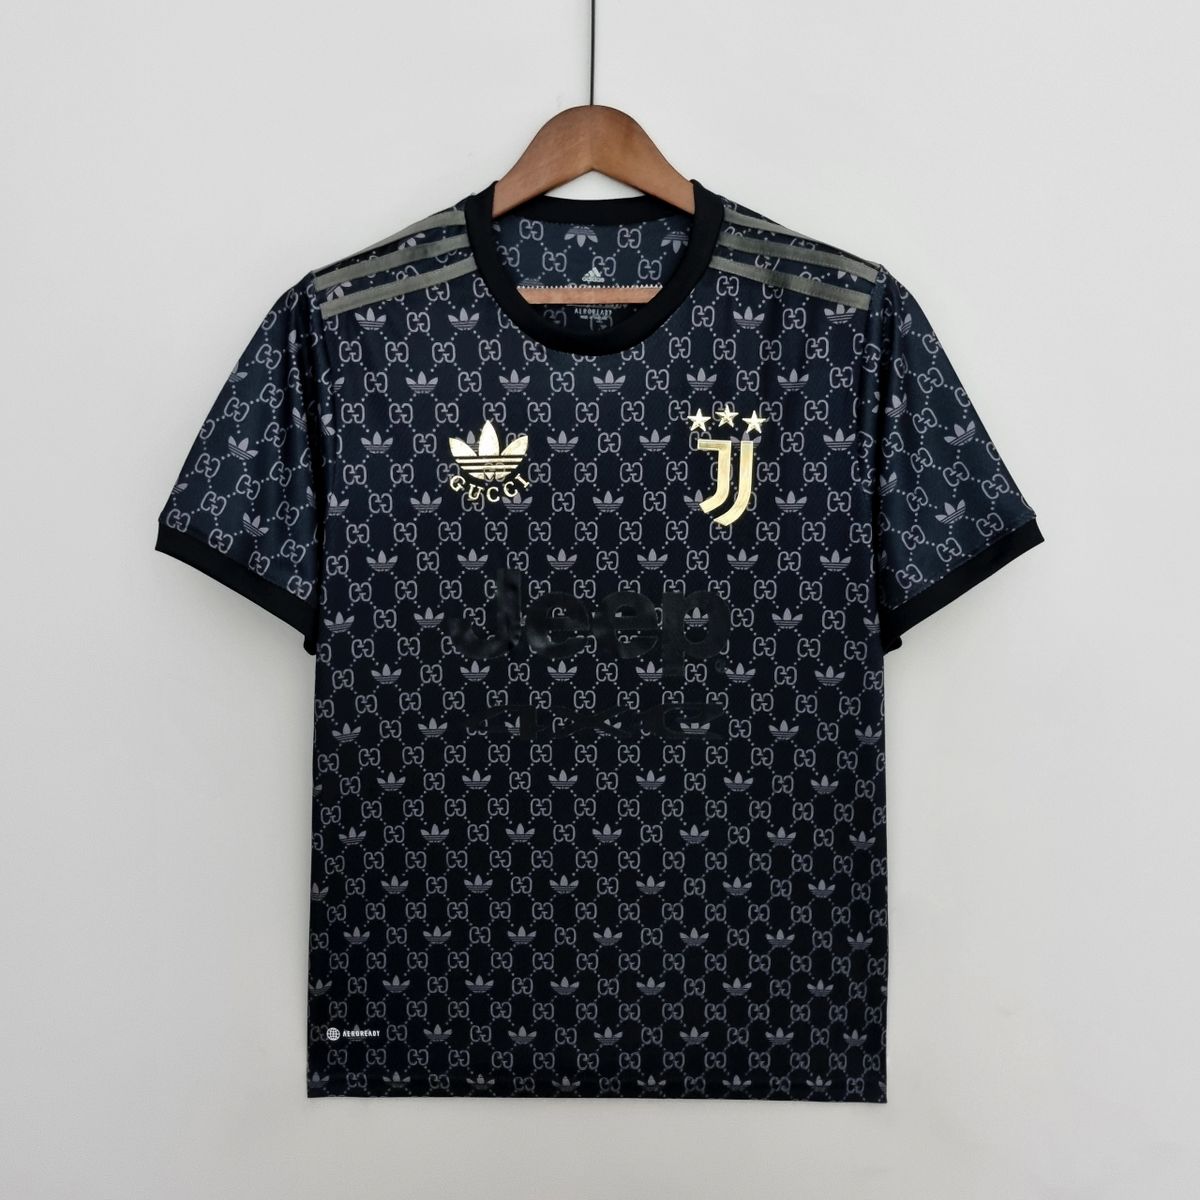 Mindst Wetland Give Juventus x Adidas & Gucci Special Edition